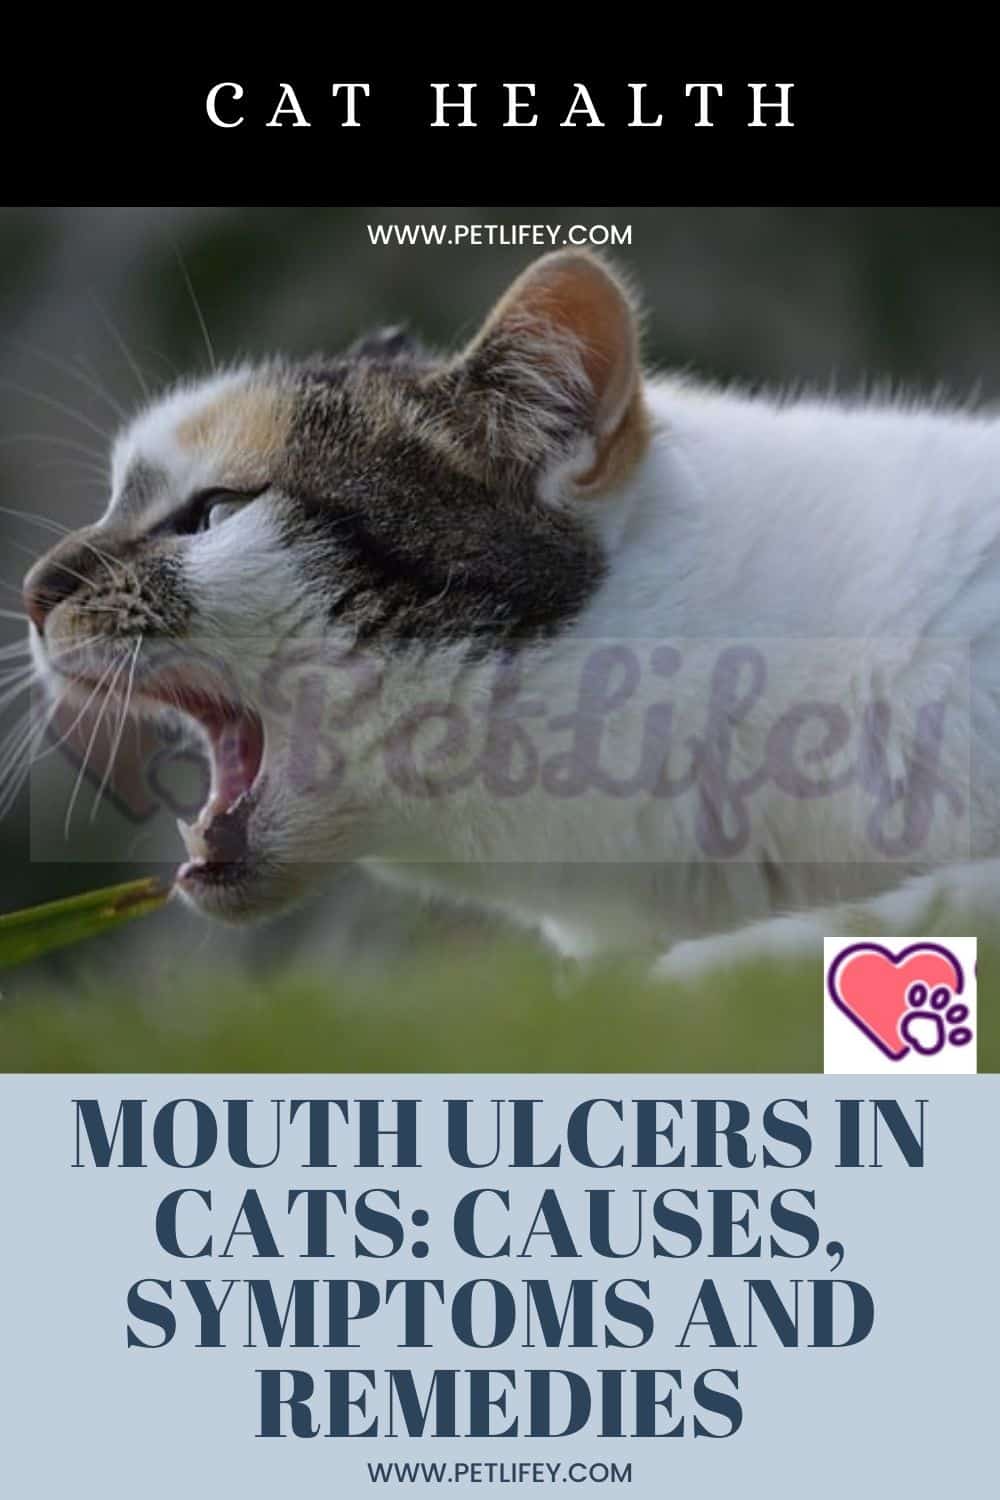 Mouth ulcers in cats